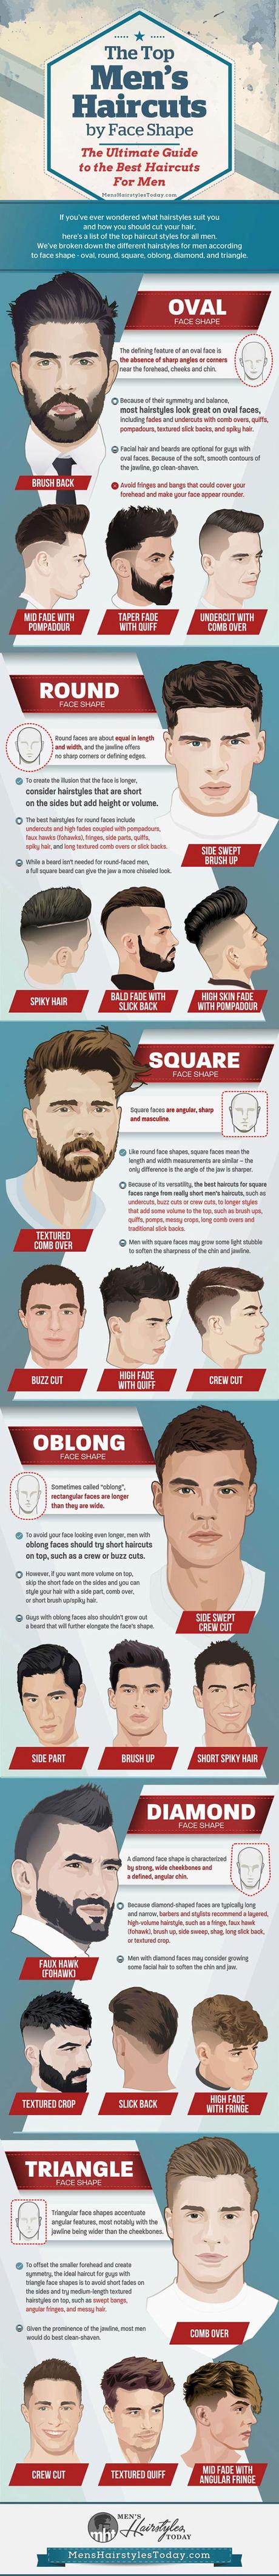 New Men’s Hairstyles to Try in 2017